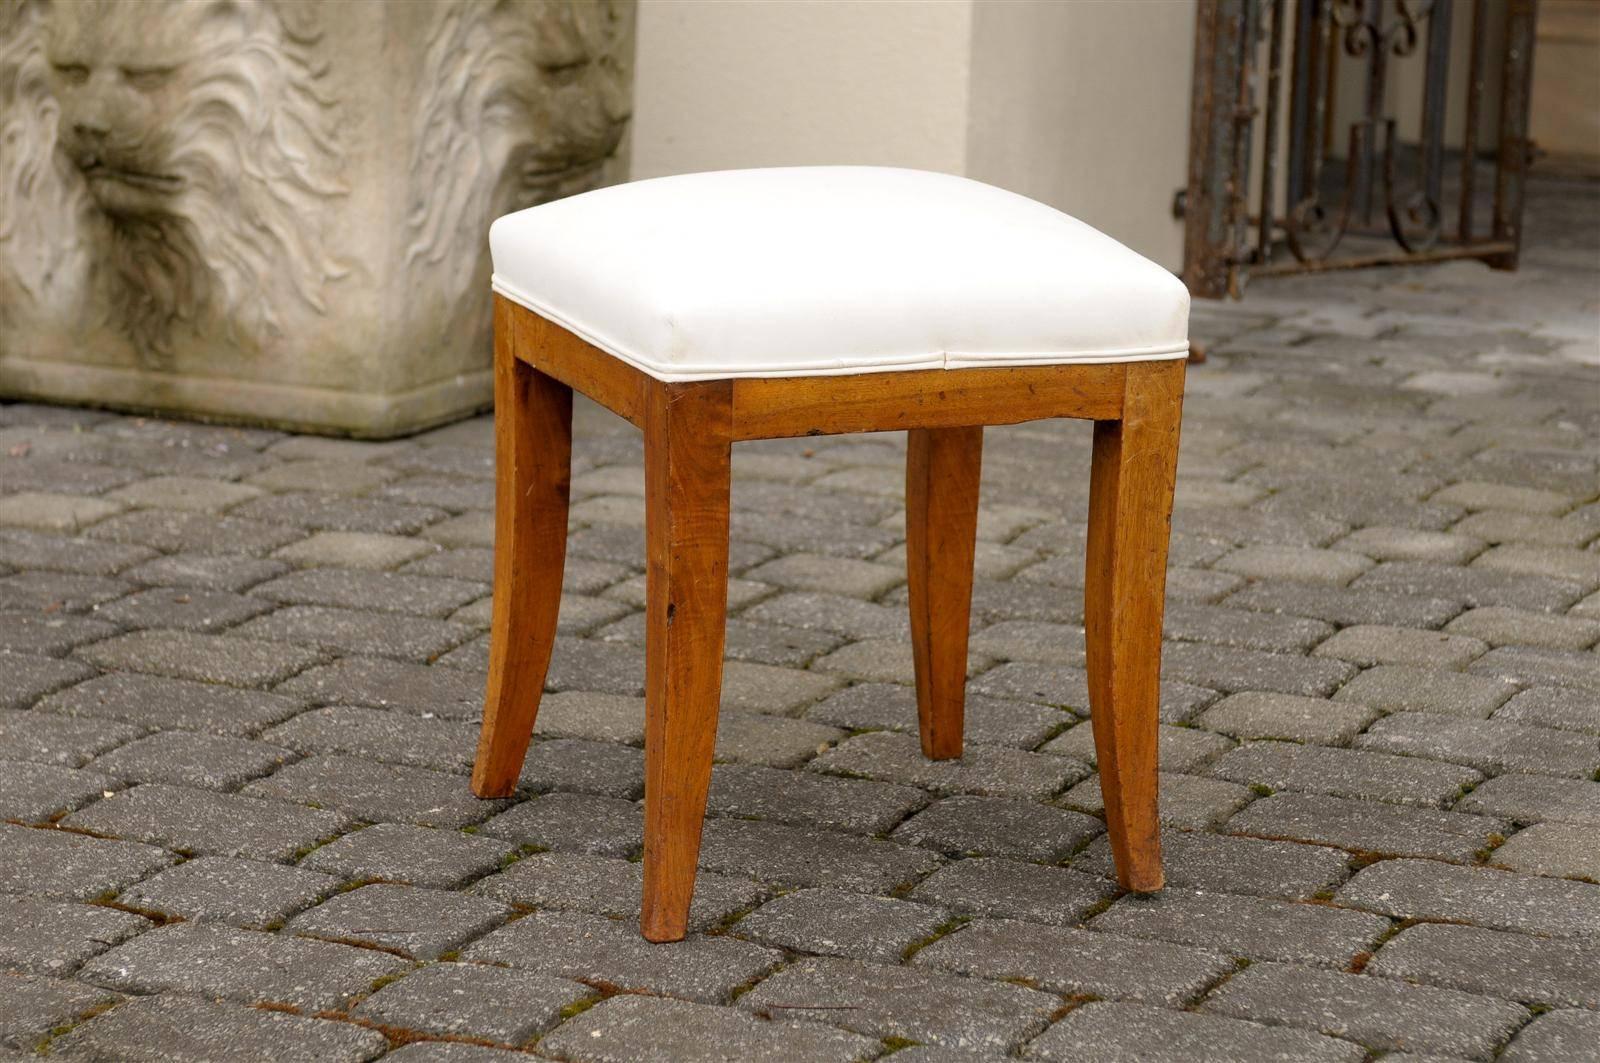 This French Biedermeier style stool features a square seat with new muslin upholstery. The neutral color of the upholstery allows the warmth of the four saber legs and simple skirt to shine. The simplicity of the lines and the richness of the wood